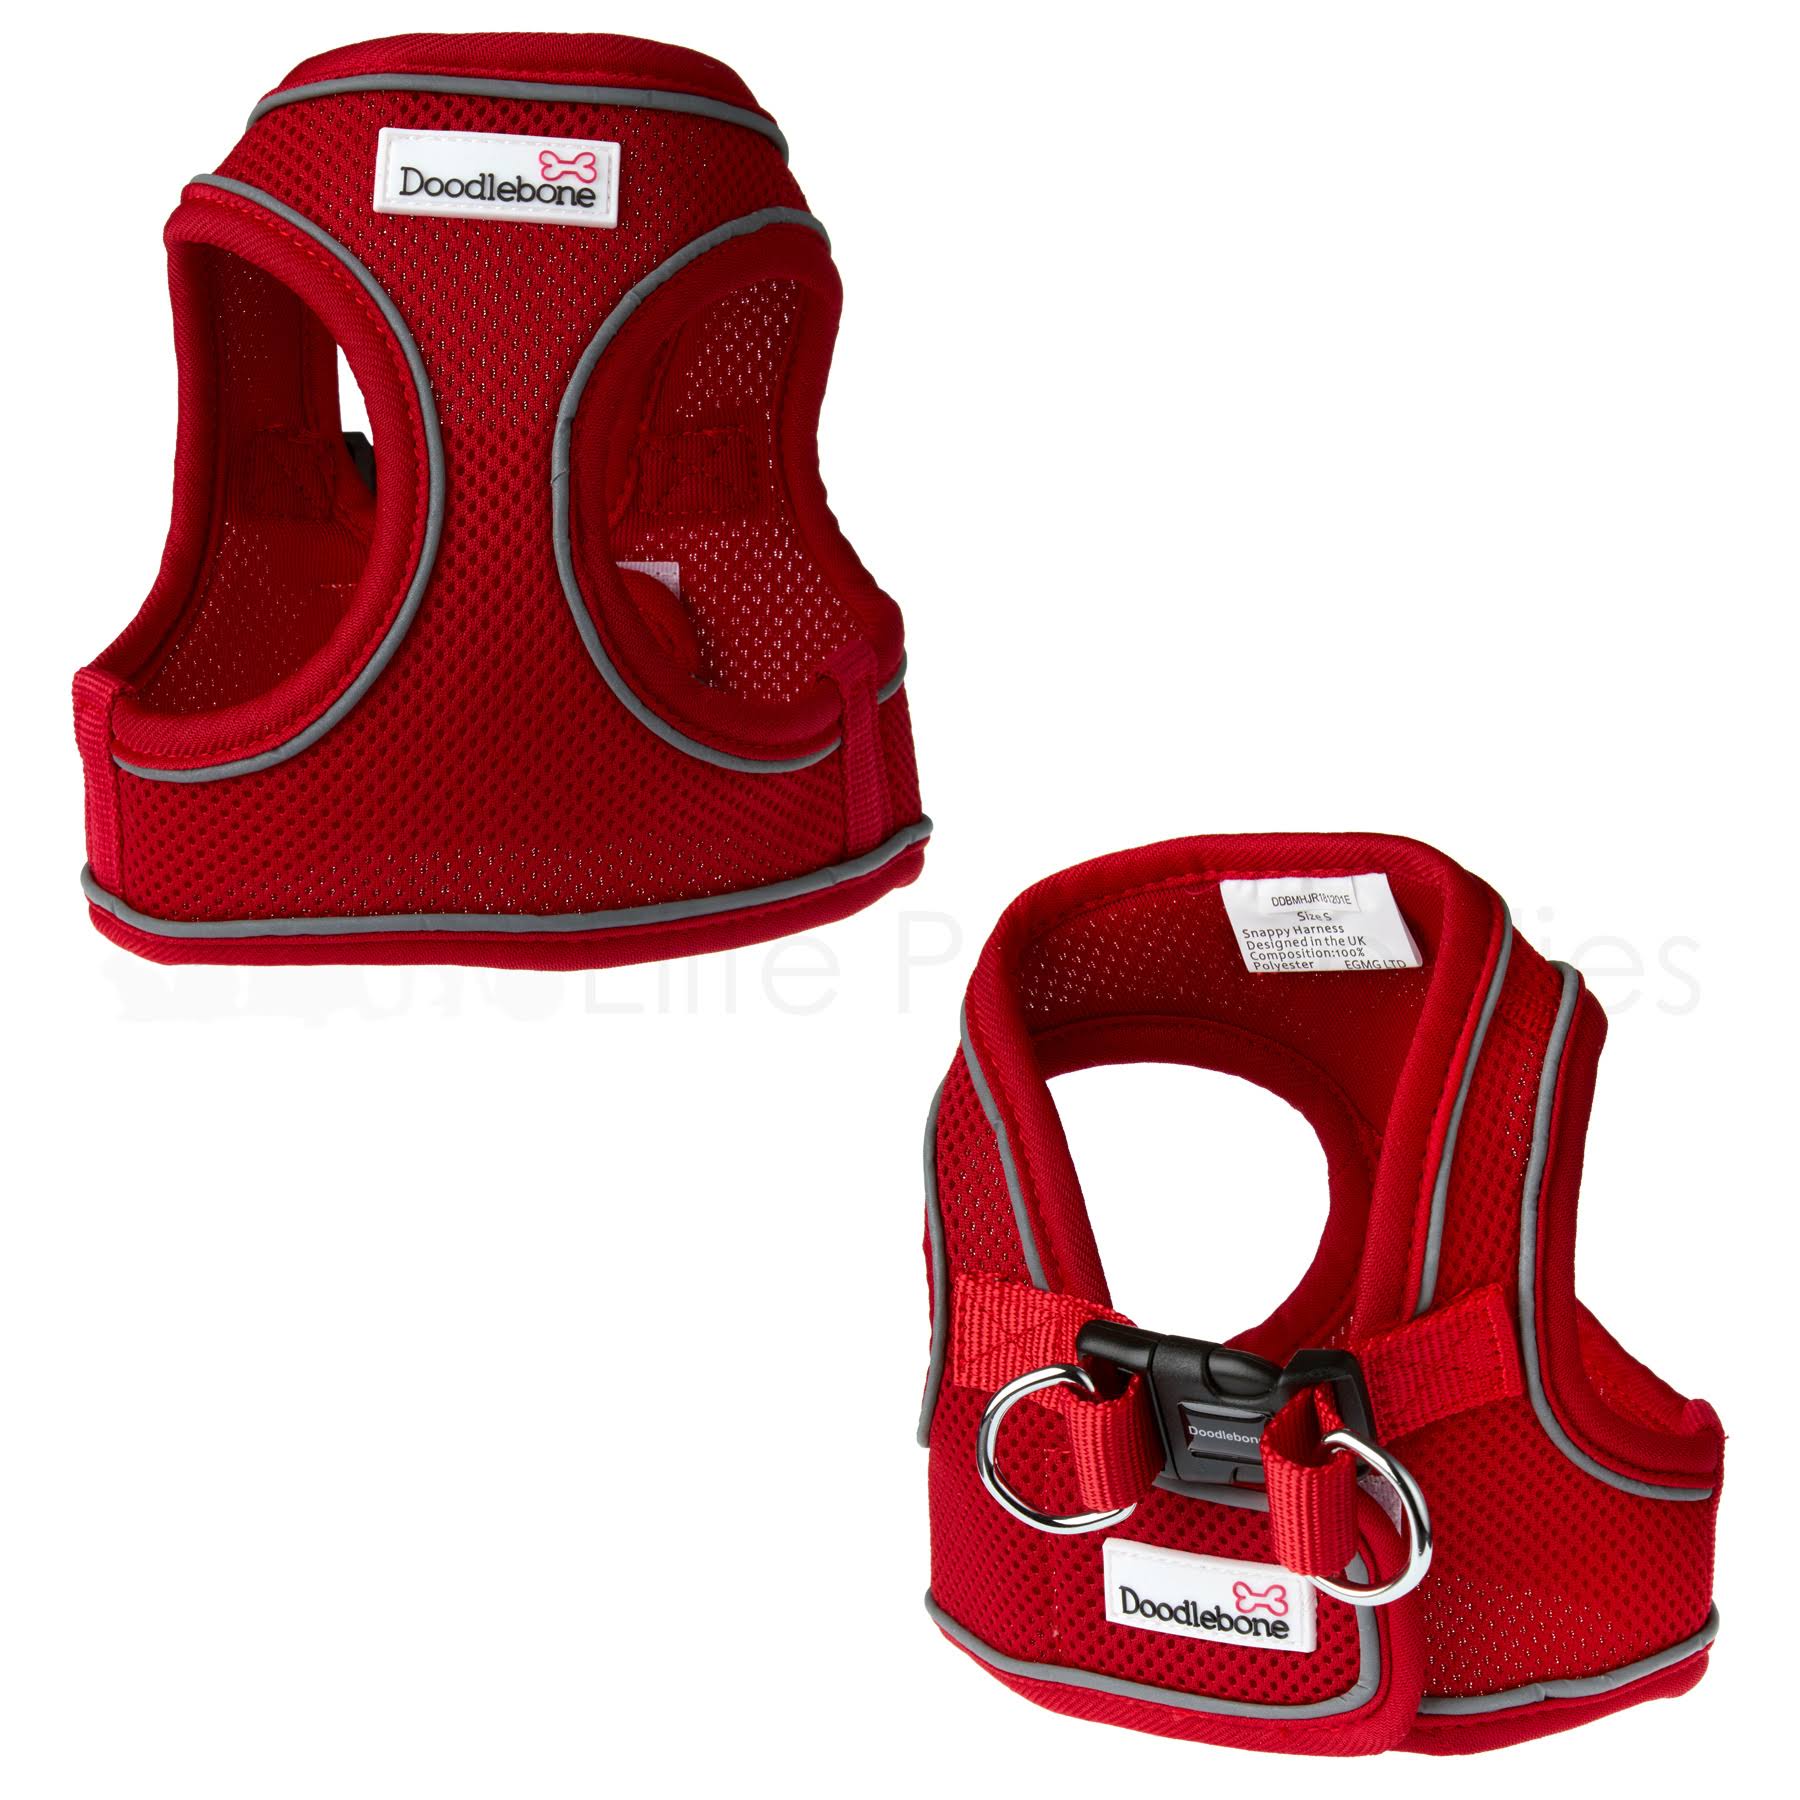 Doodlebone Airmesh Snappy Dog Harness - Red